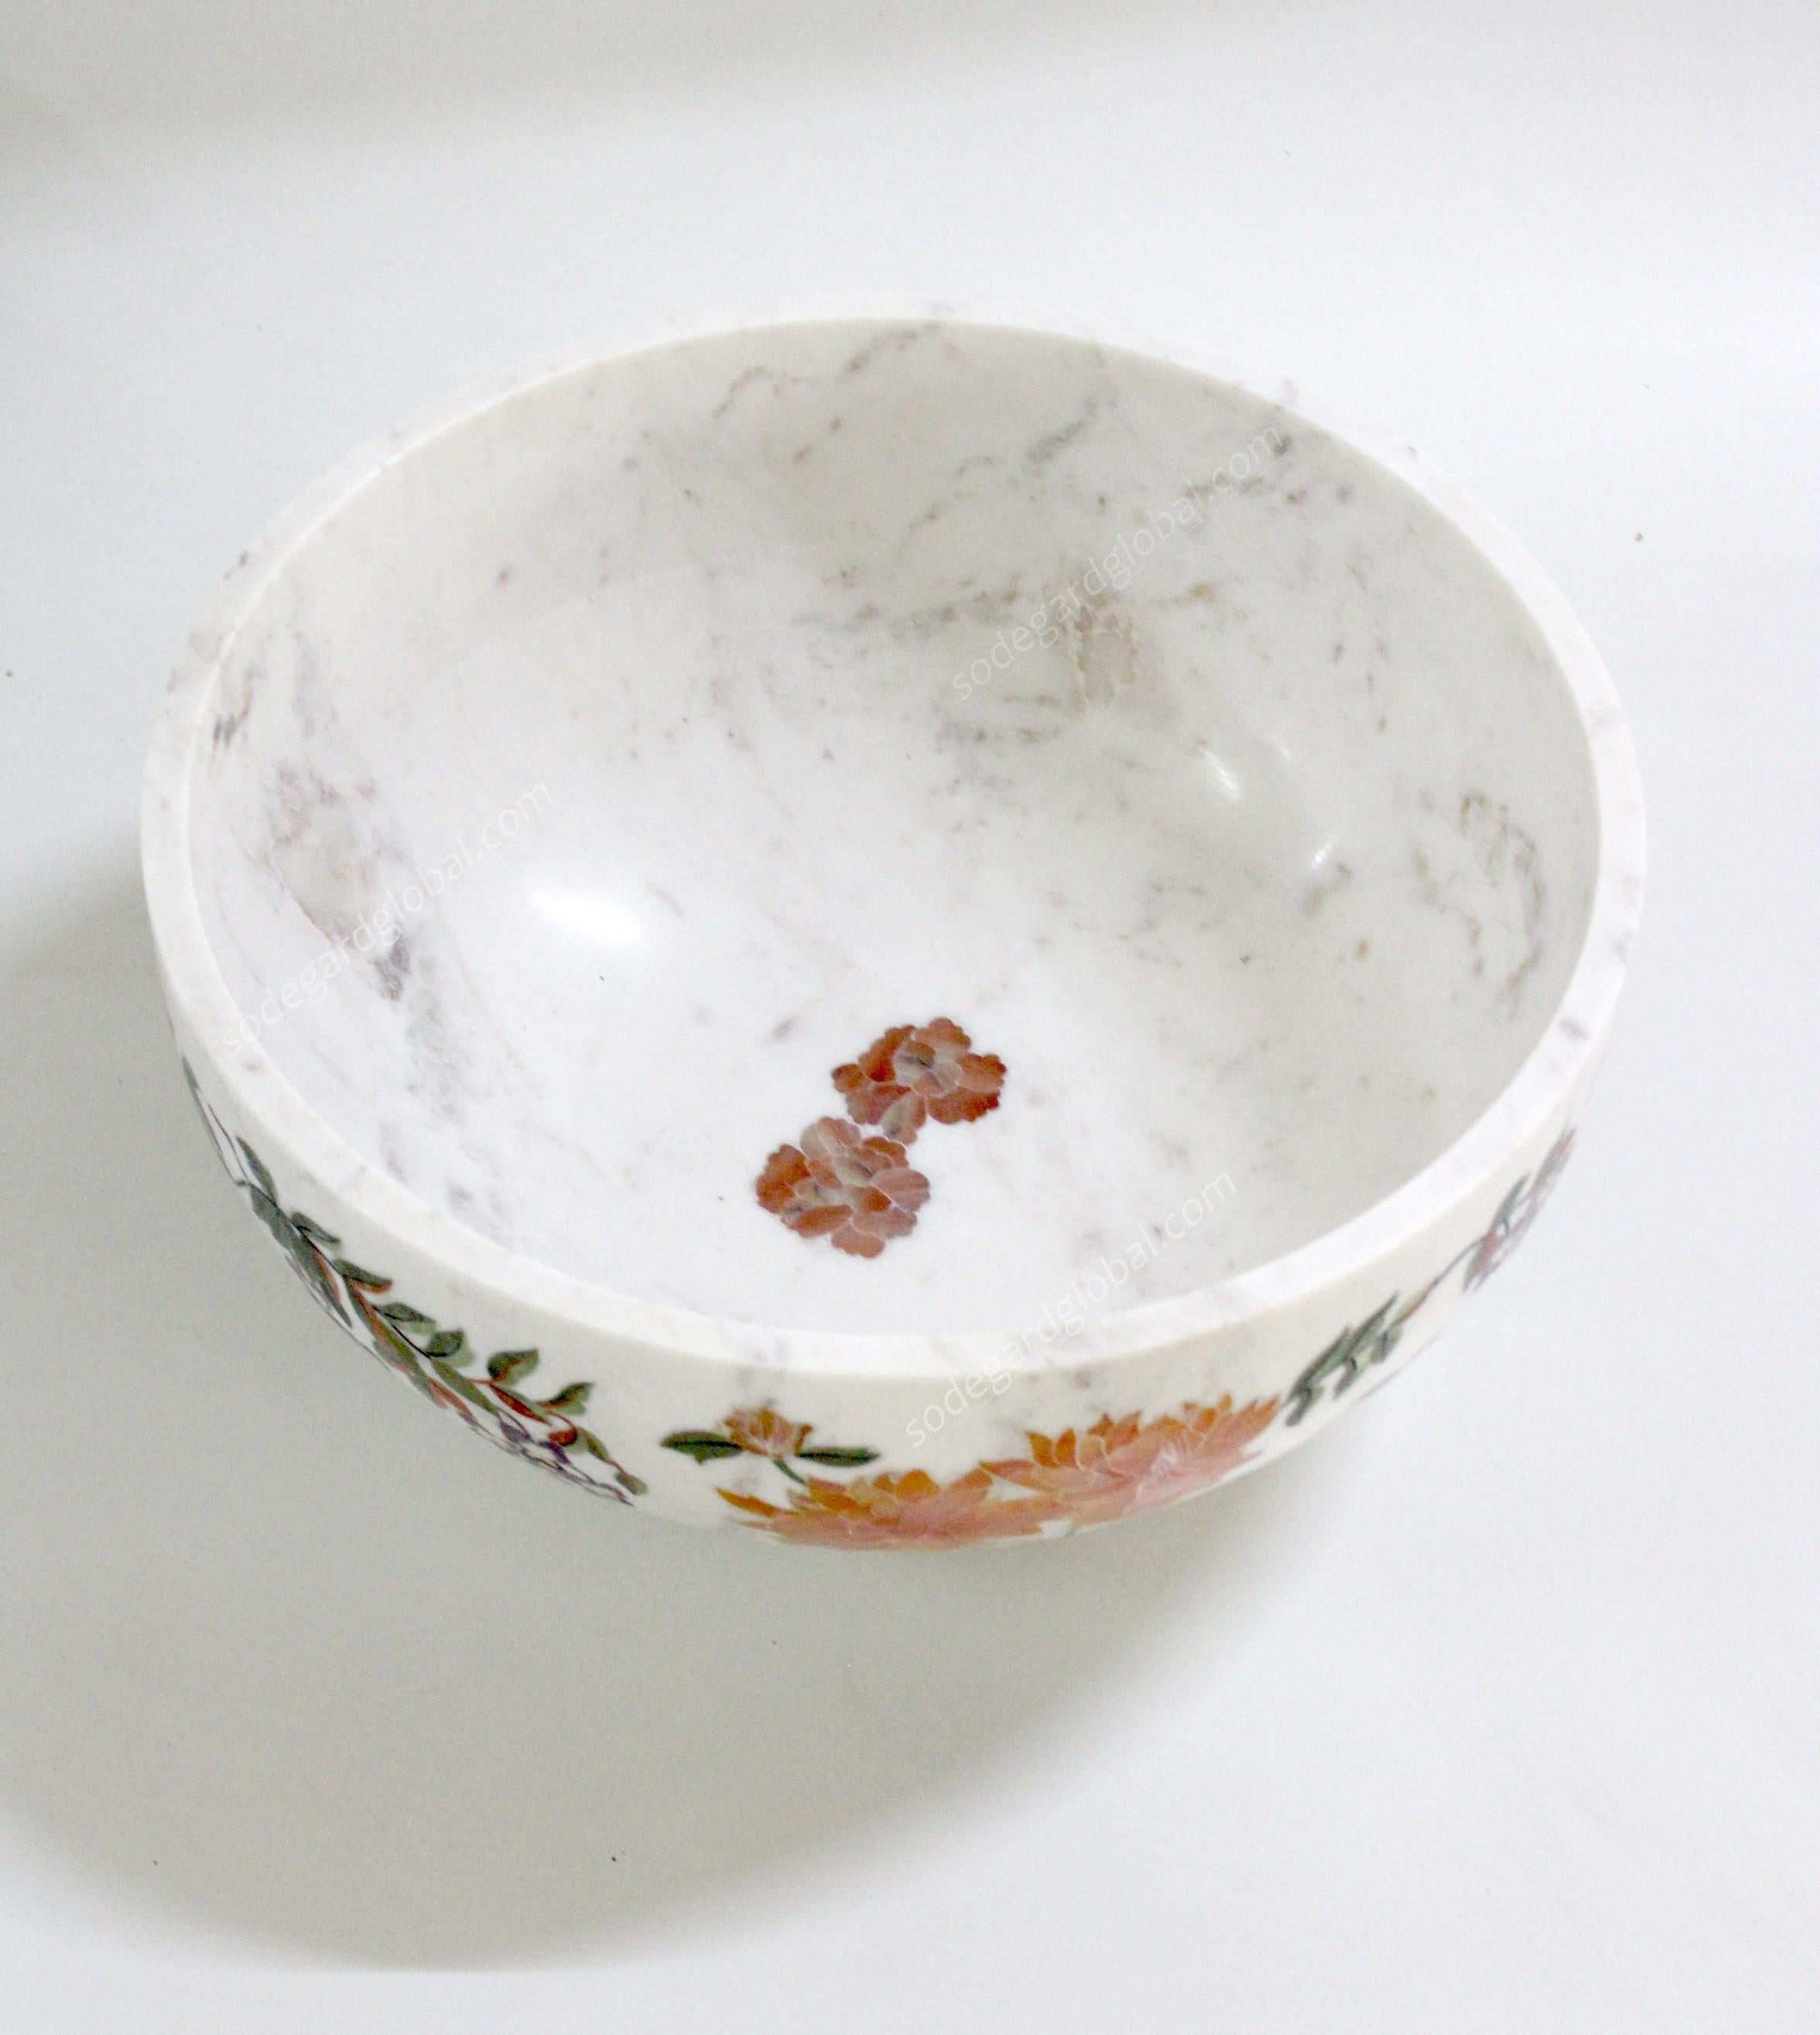 Handmade Ornamenti Bowl Inlay in White Marble by Stephanie Odegard For Sale 8